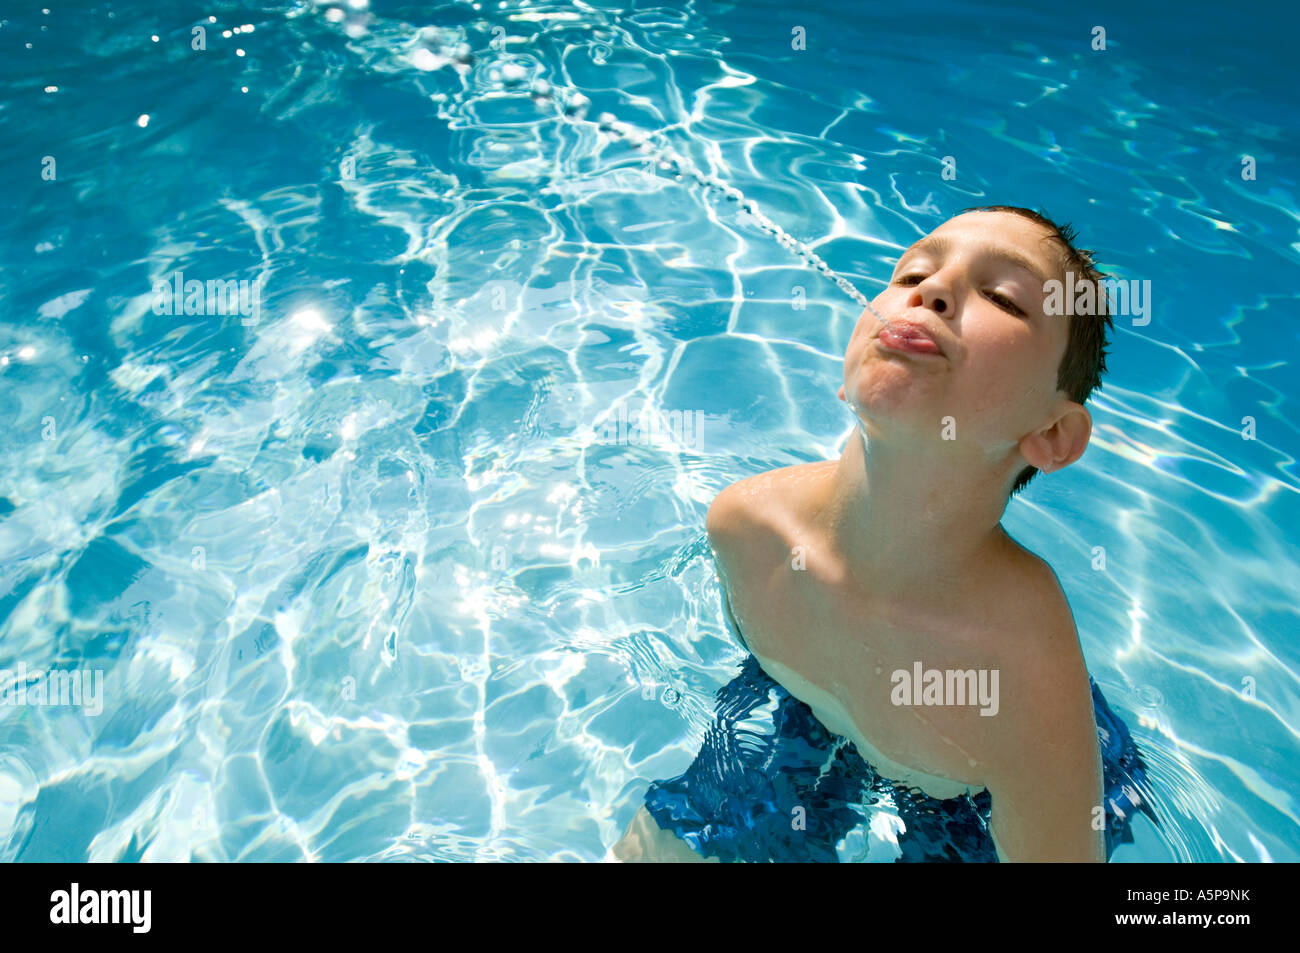 Boy squirting water in swimming pool. Stock Photo